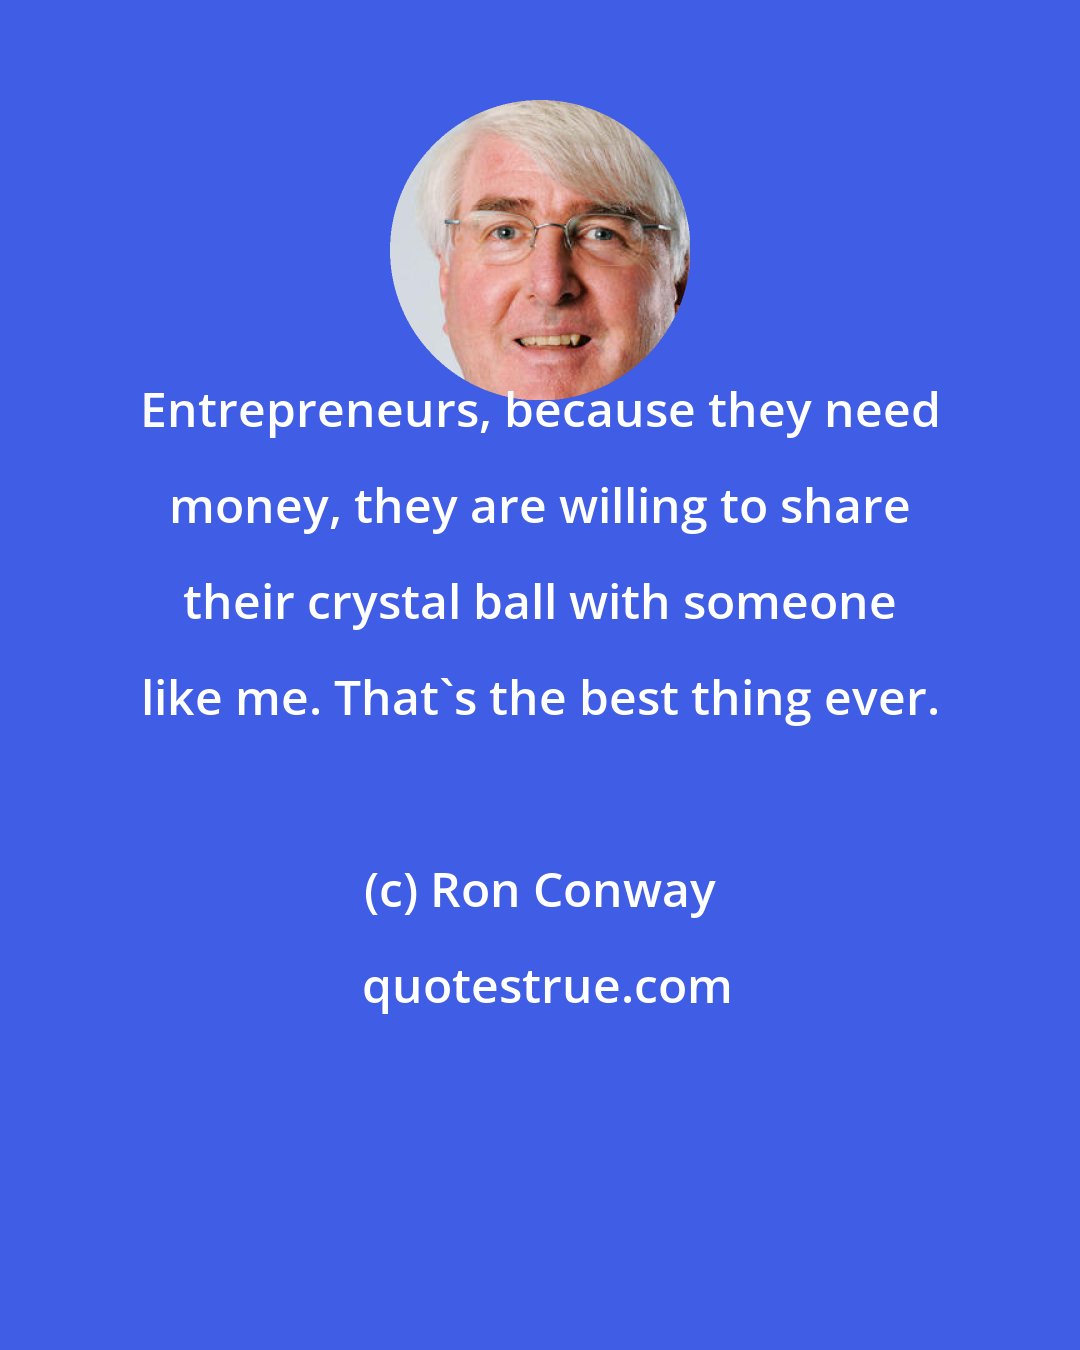 Ron Conway: Entrepreneurs, because they need money, they are willing to share their crystal ball with someone like me. That's the best thing ever.